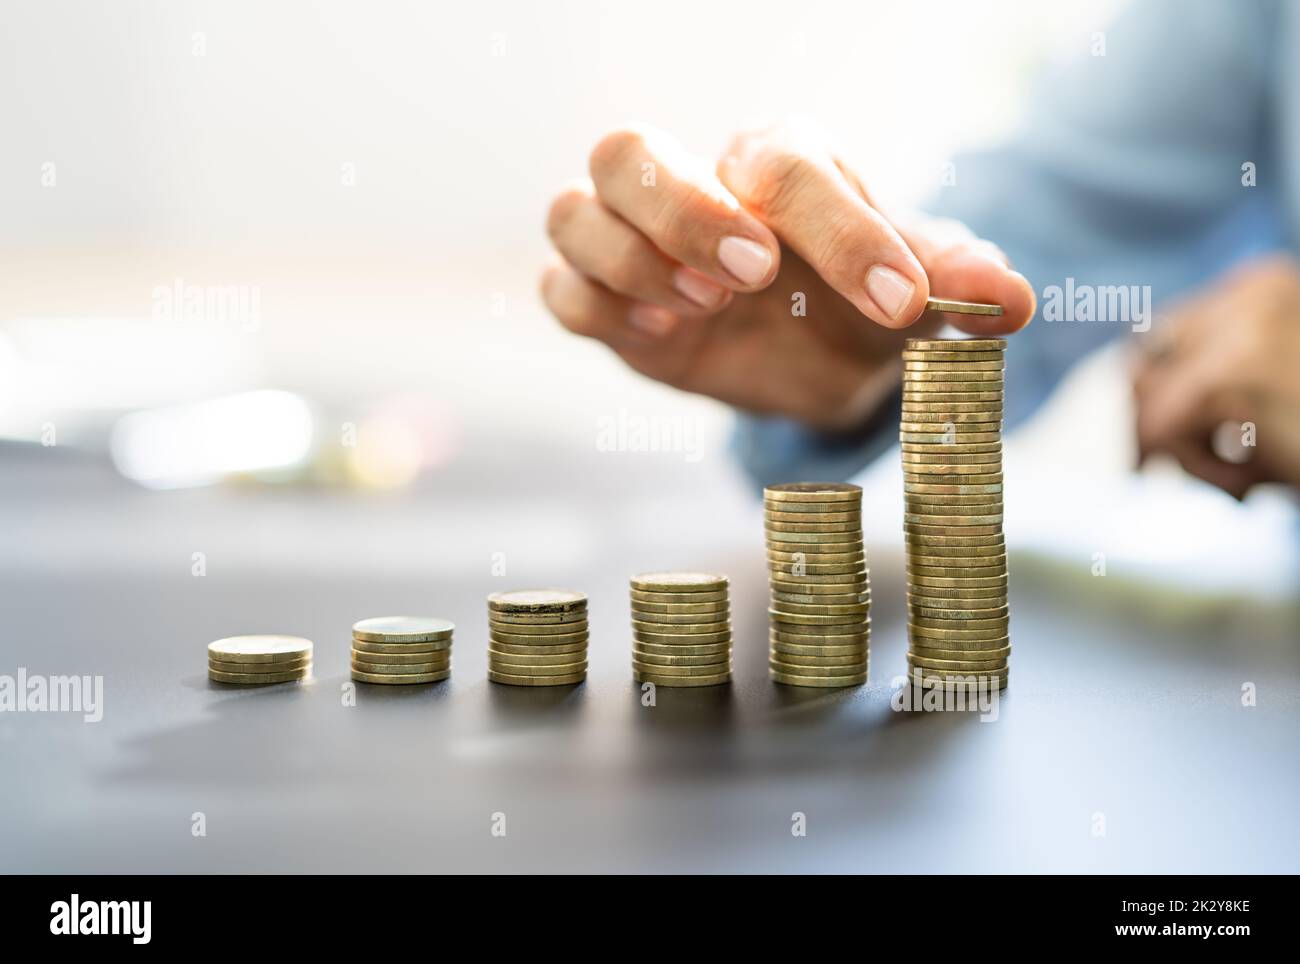 Business Woman Salary Increase And Money Investment Stock Photo